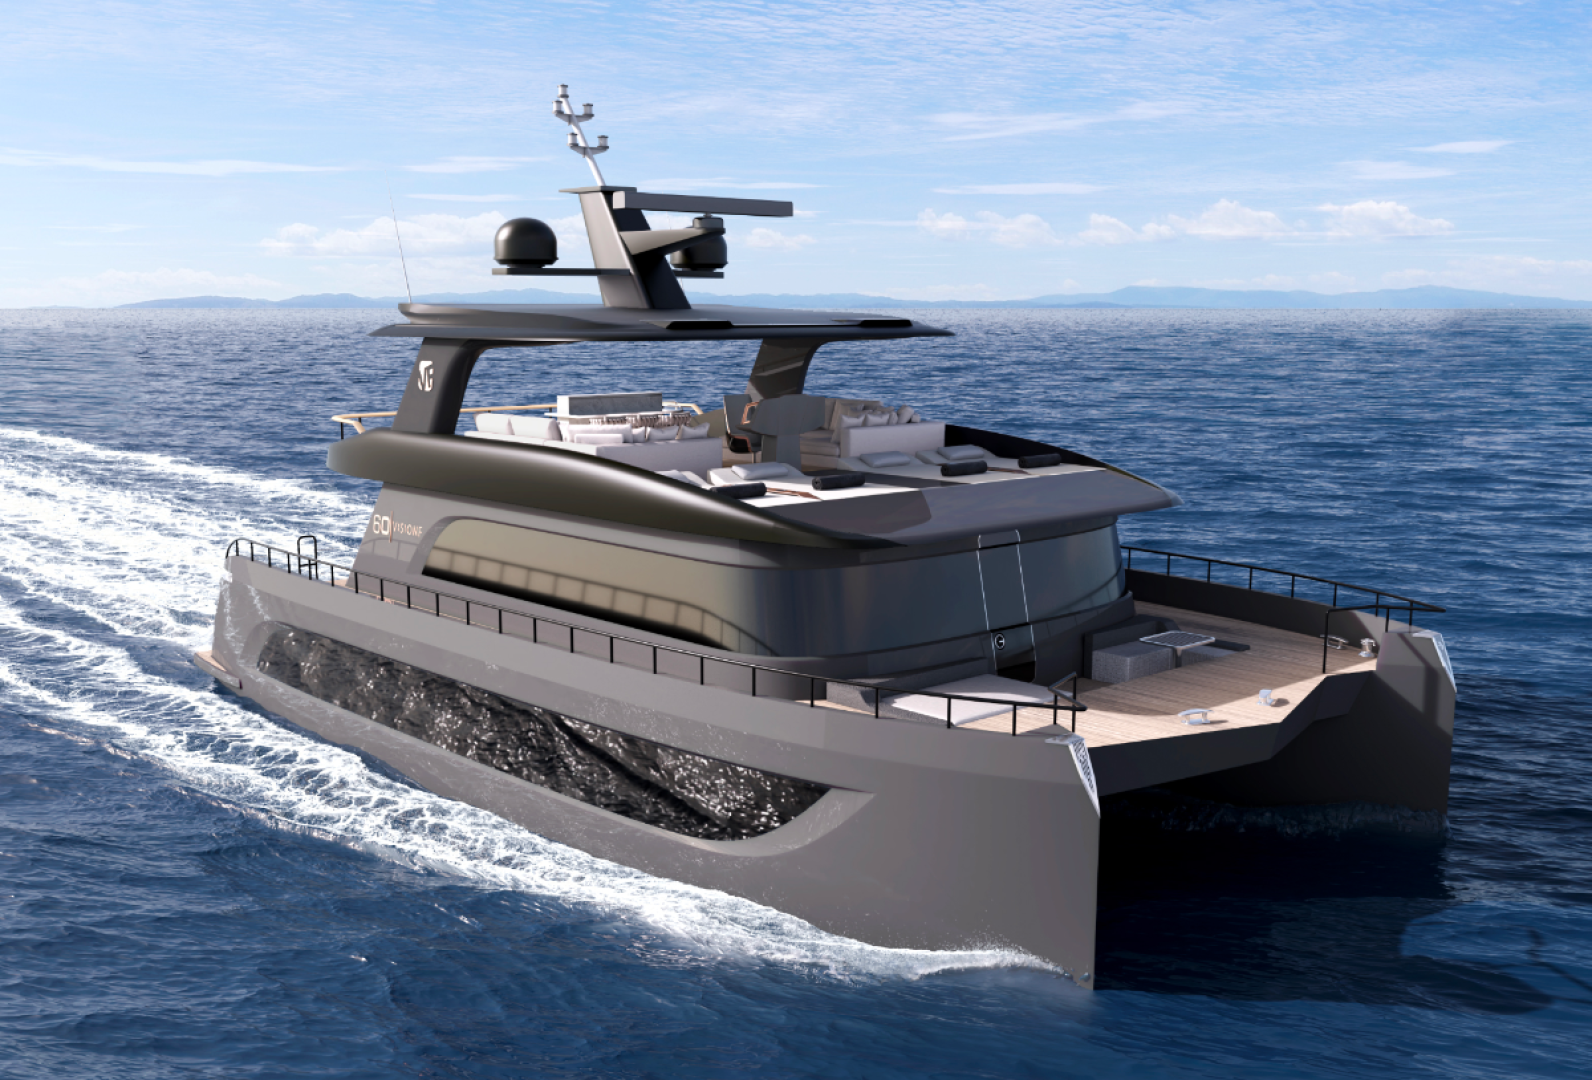 VisionF Yachts introduce new GRP 60-foot model to luxury catamaran line-up